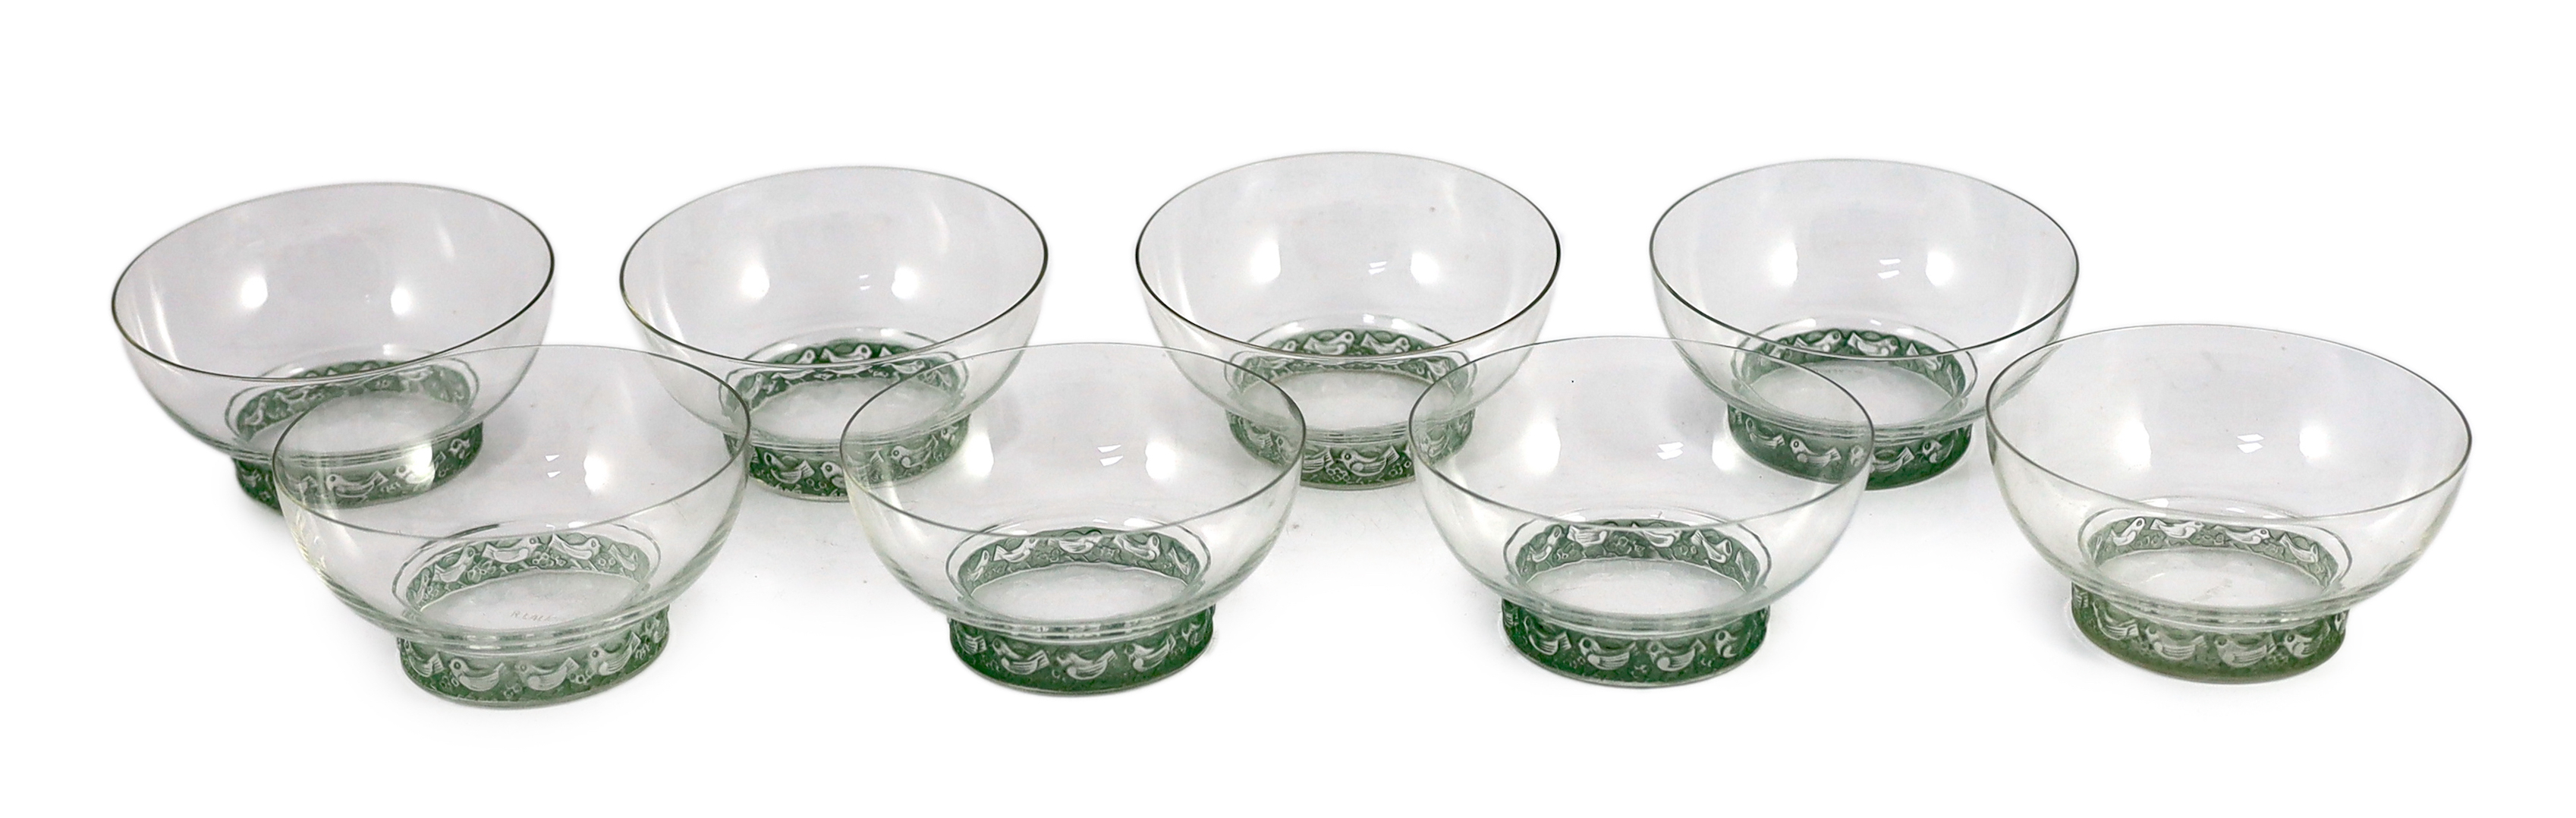 A set of eight R. Lalique Dampierre pattern bowls, model no. 3136, designed 1932, one bowl with tiny rim chip